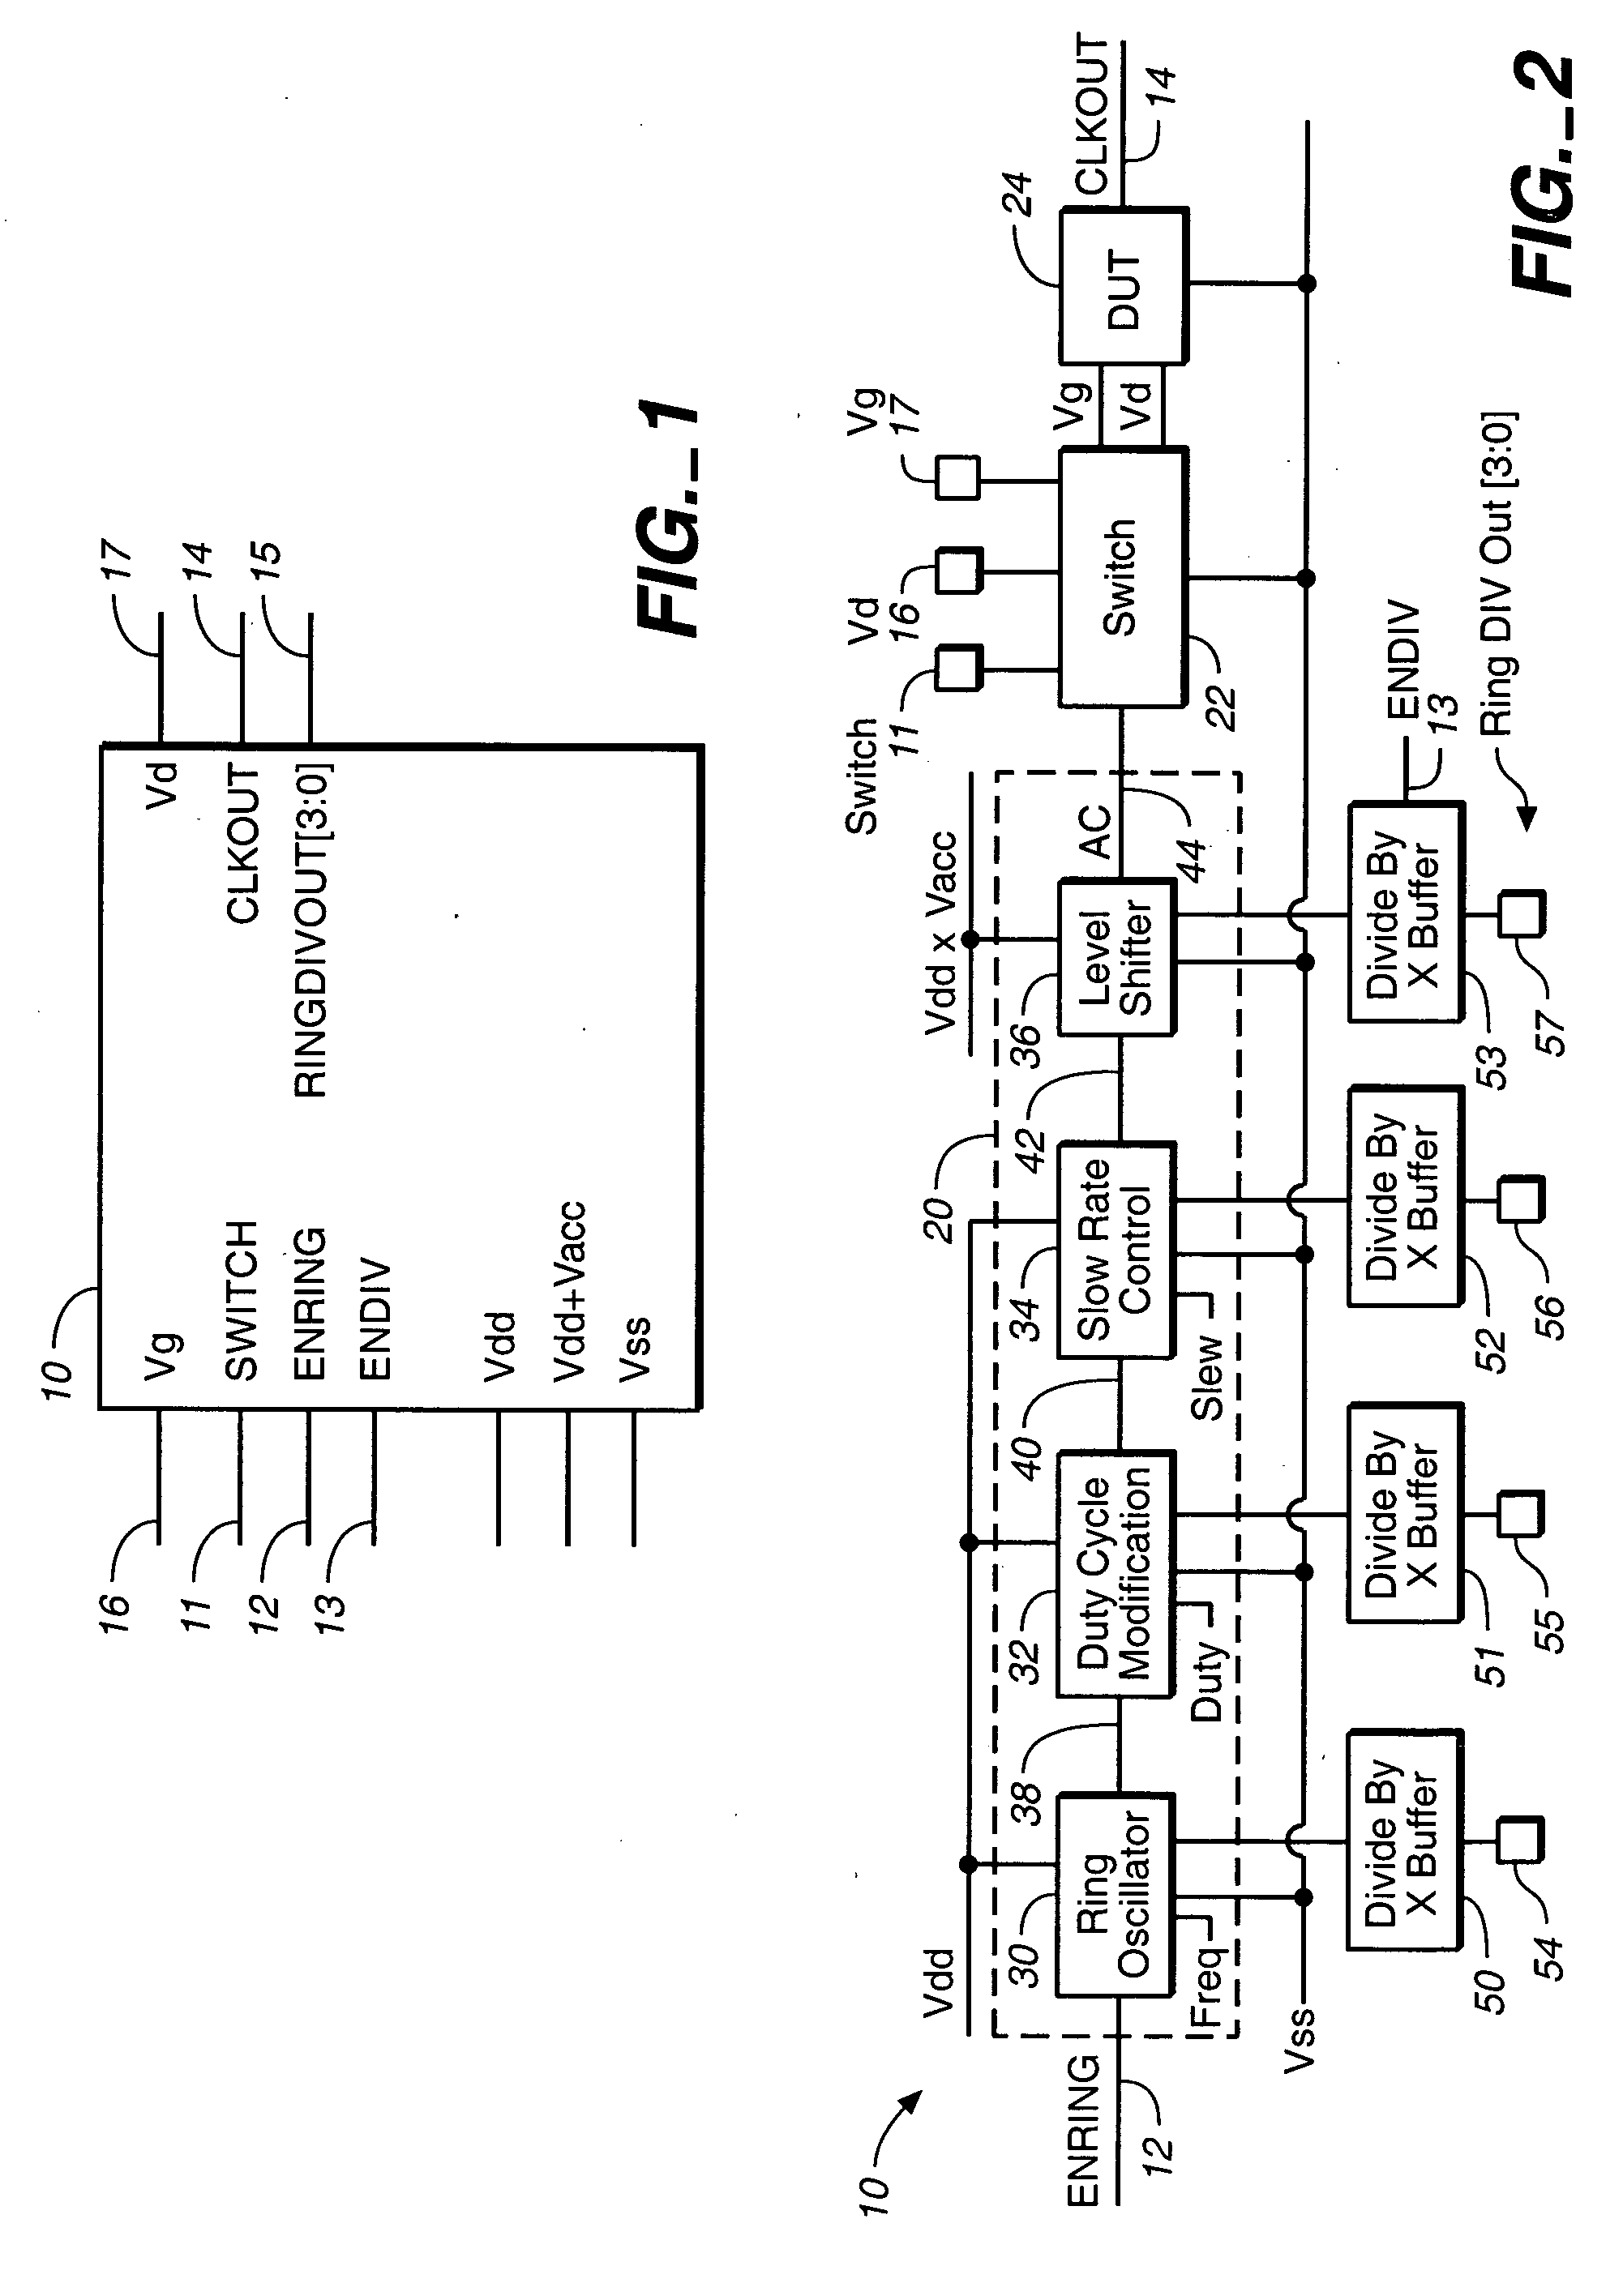 Reliability circuit for applying an AC stress signal or DC measurement to a transistor device